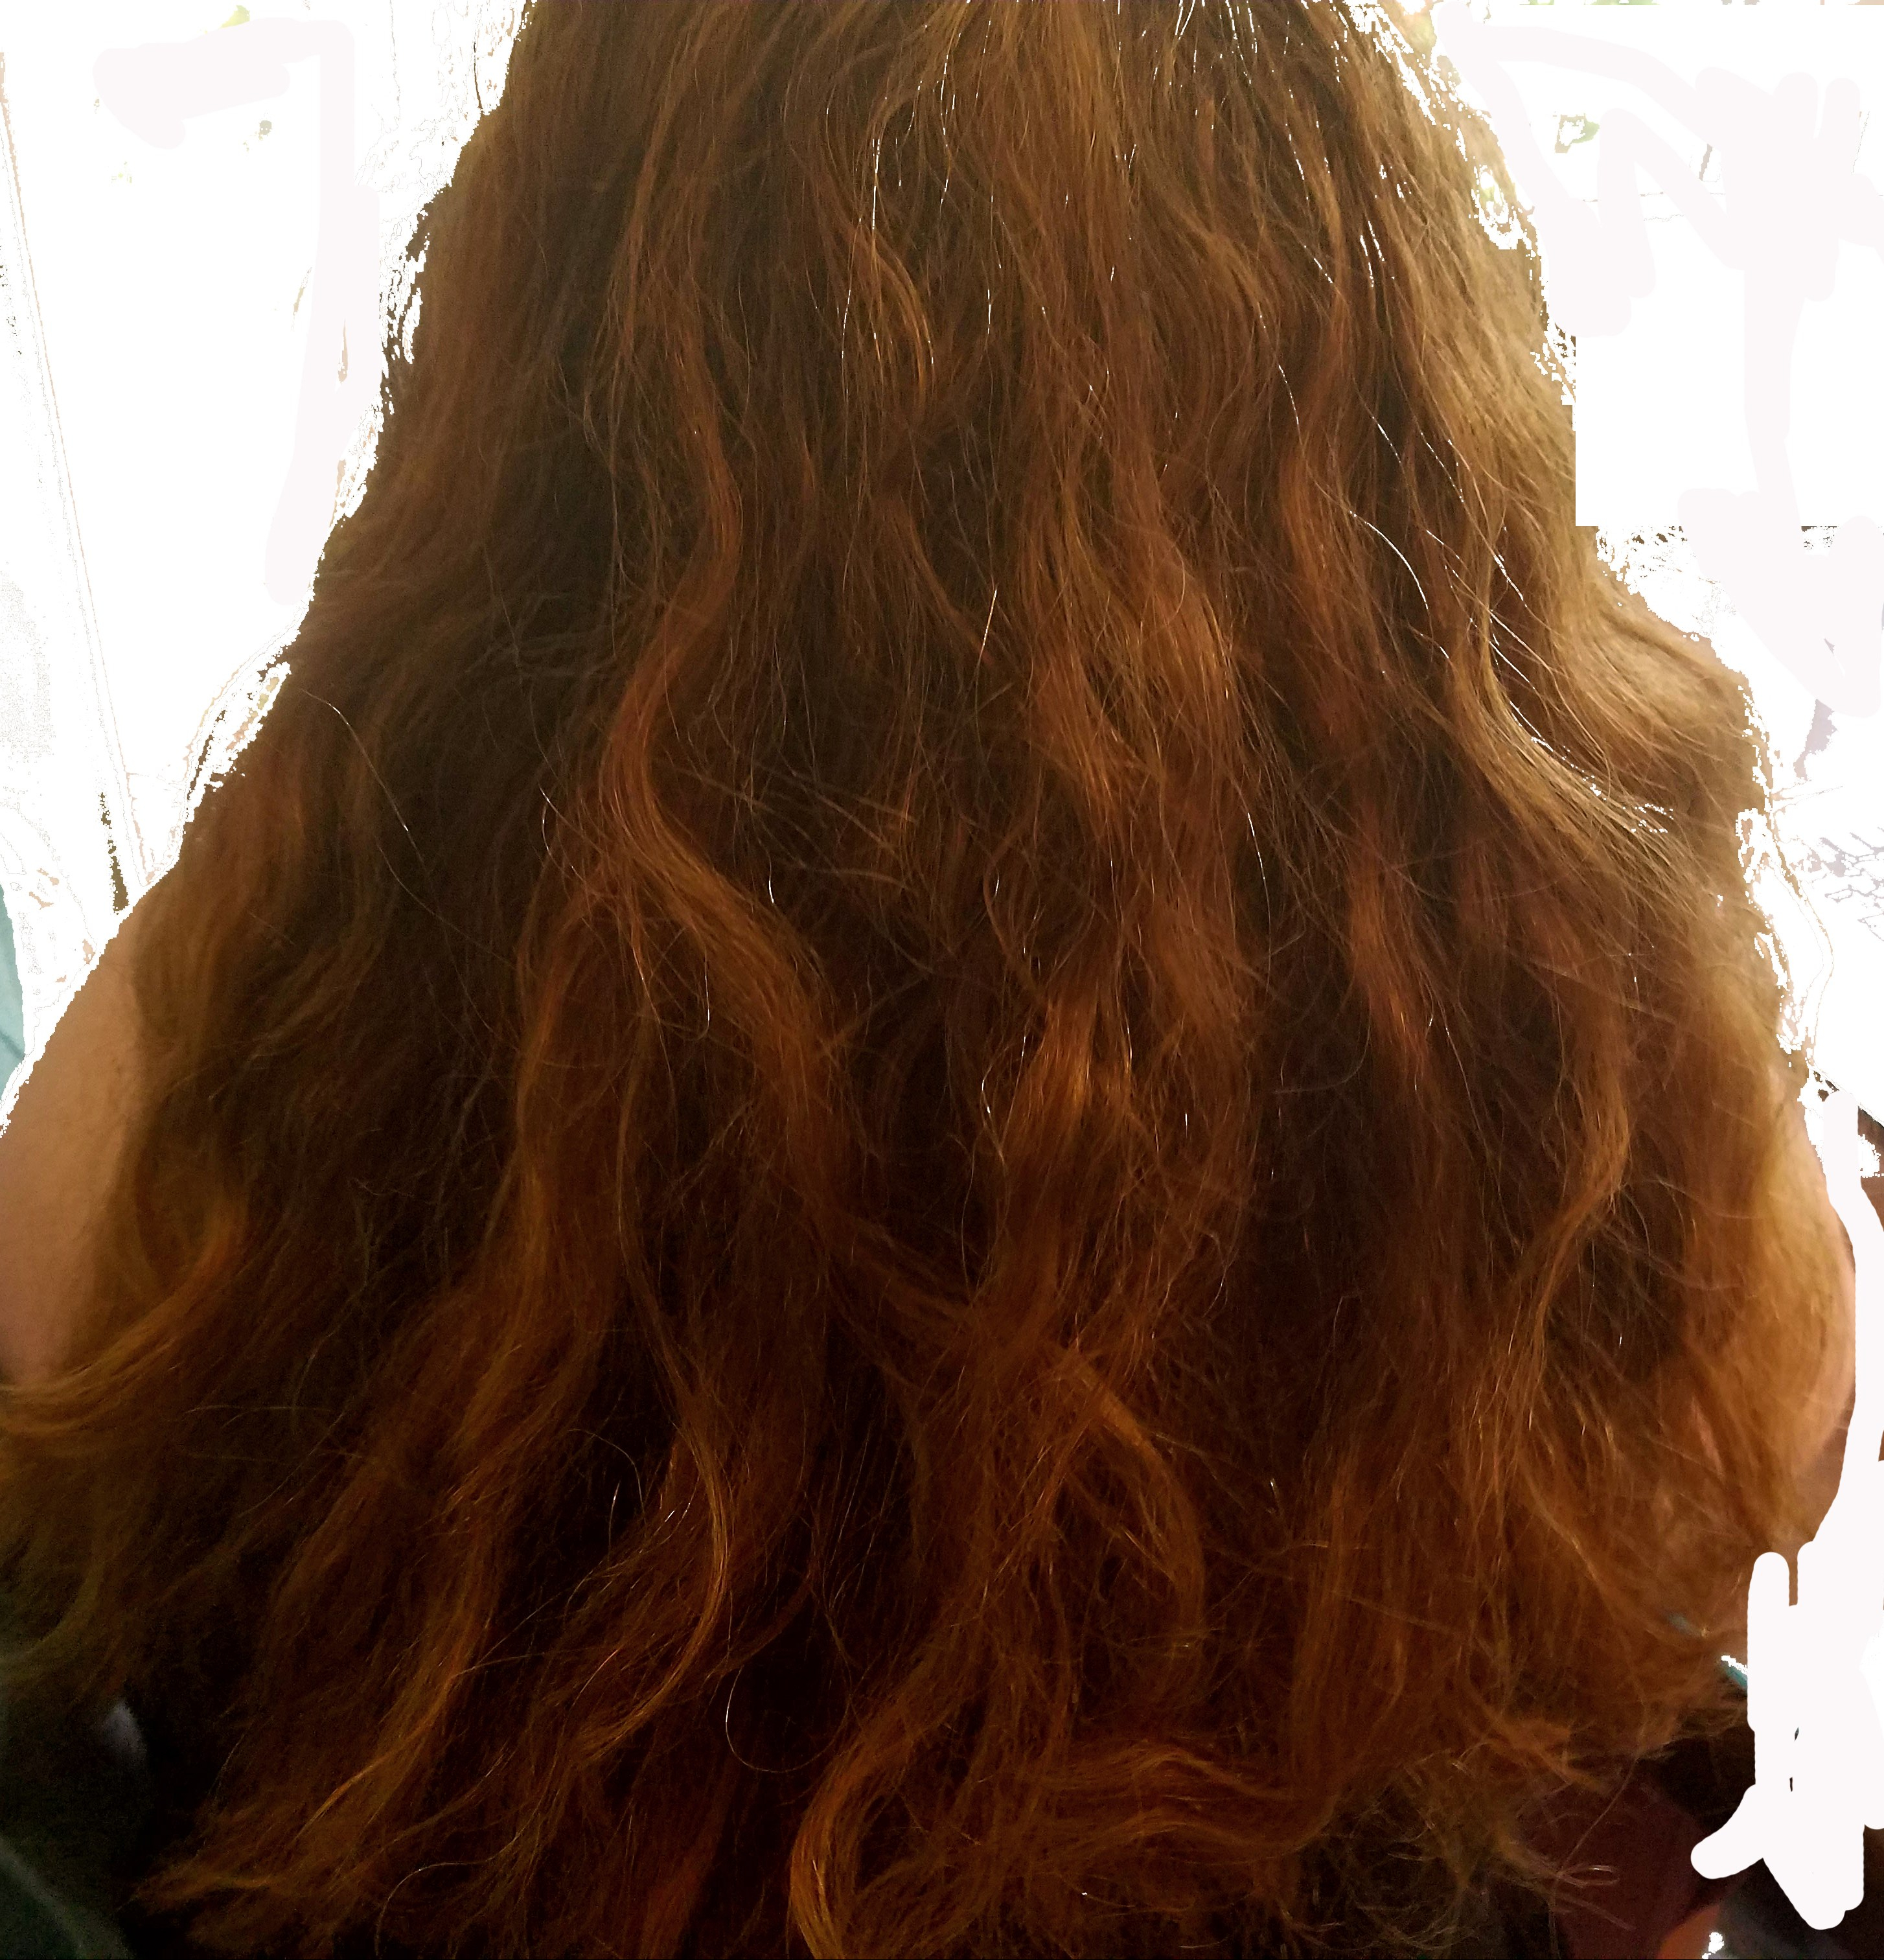 Photograph of back of woman with long red hair